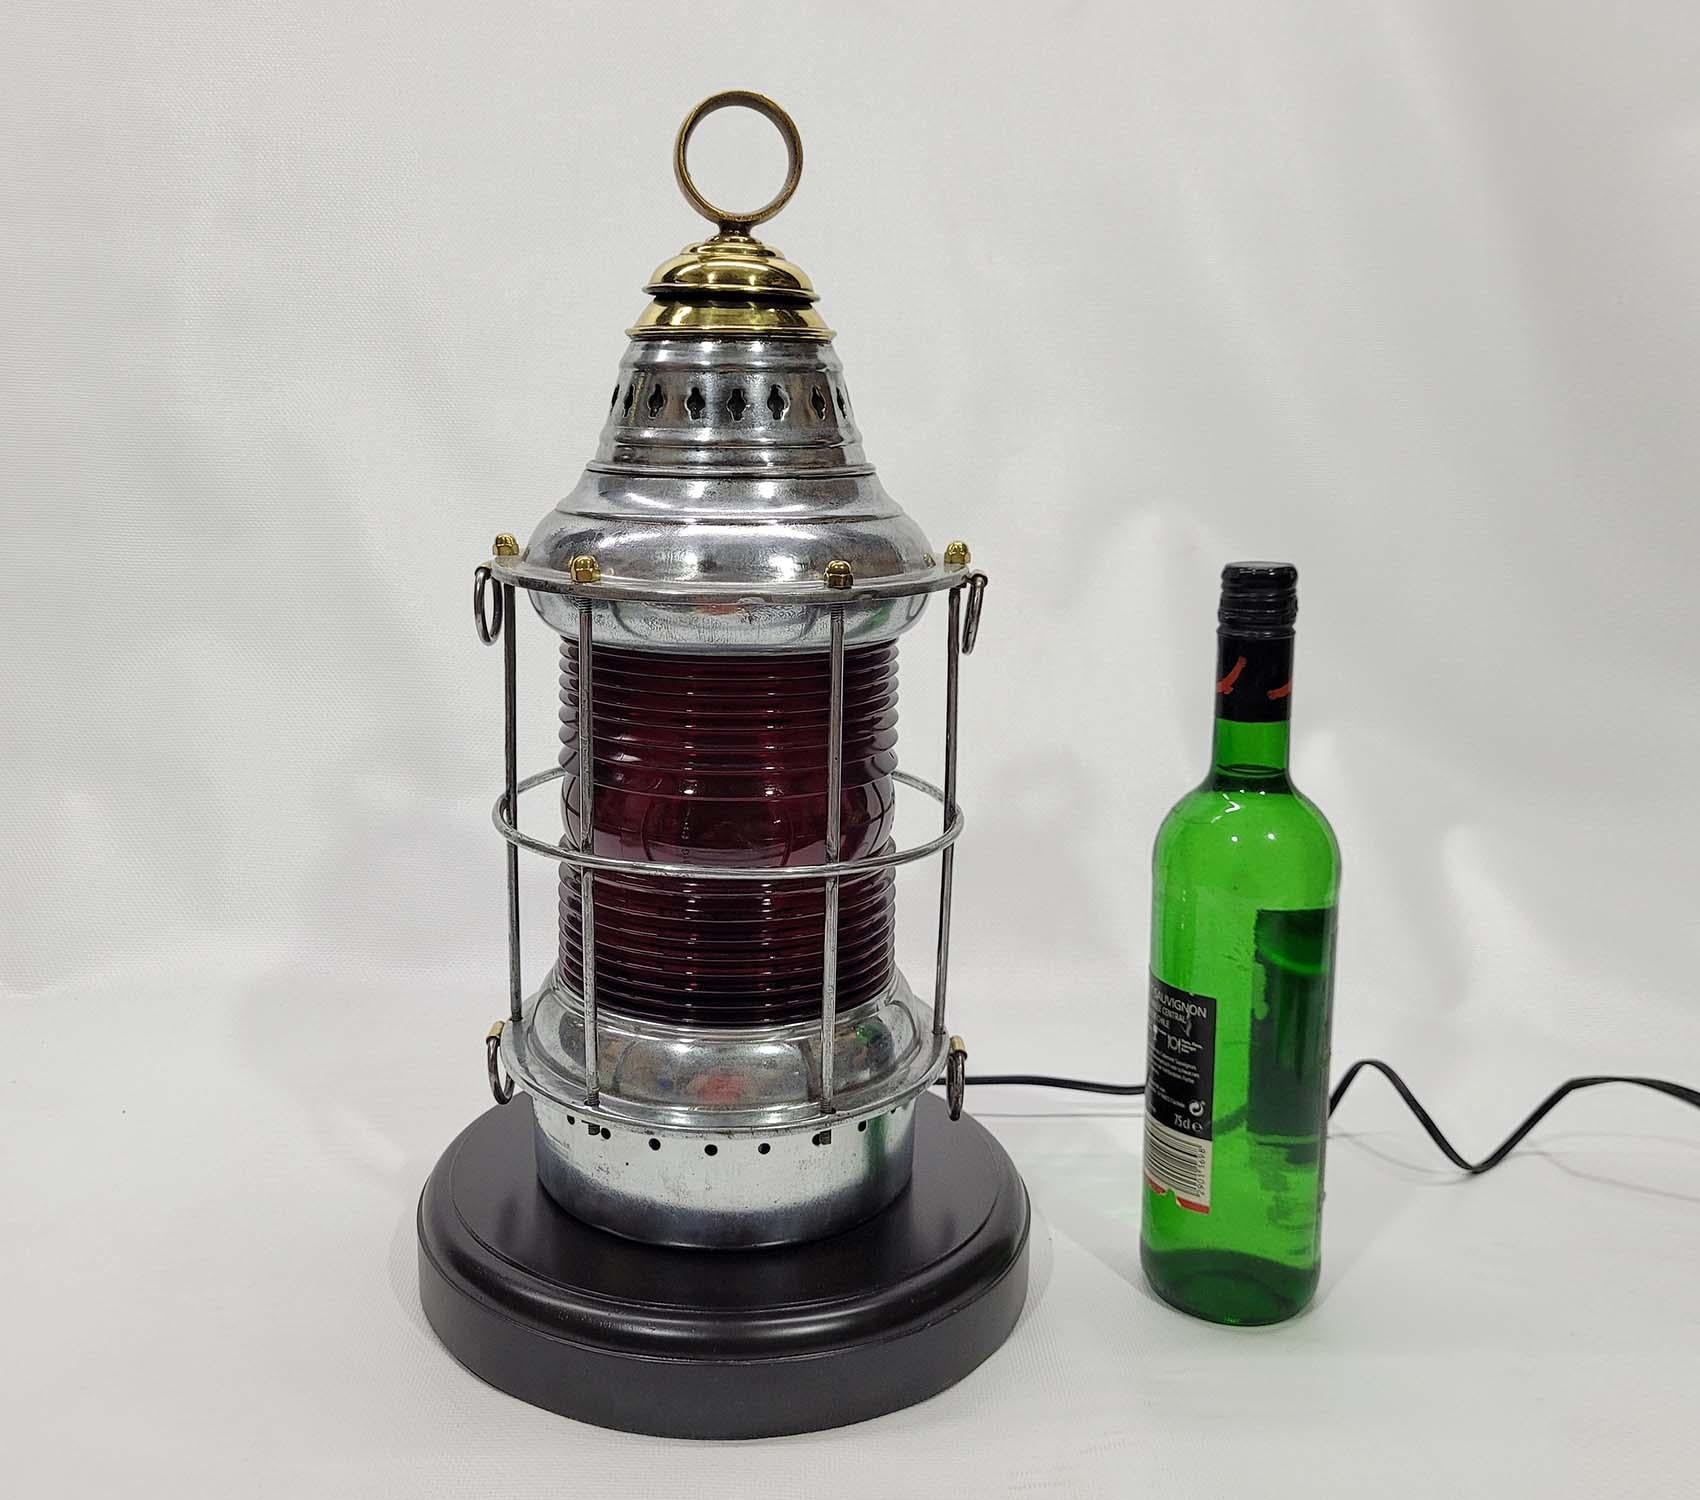 360-degree ships lantern with richly colored red Fresnel lens, protective cage bars, hoisting rings, polished steel case and brass cap. Rewired with a new socket. Mounted to a varnished wood base. This has been meticulously polished and lacquered.